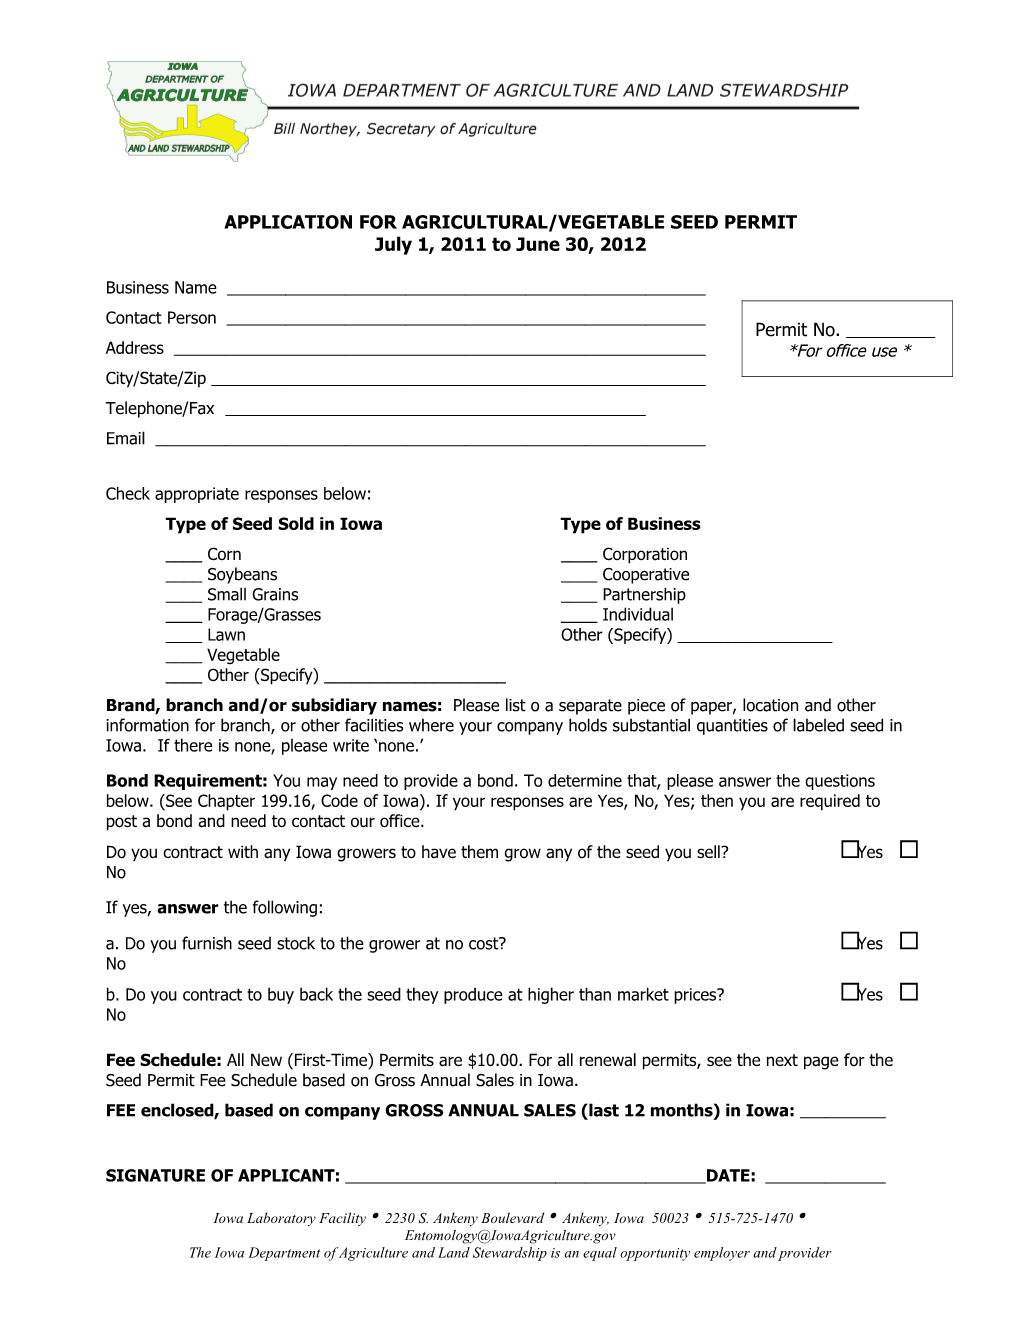 Application for Agricultural/Vegetable Seed Permit